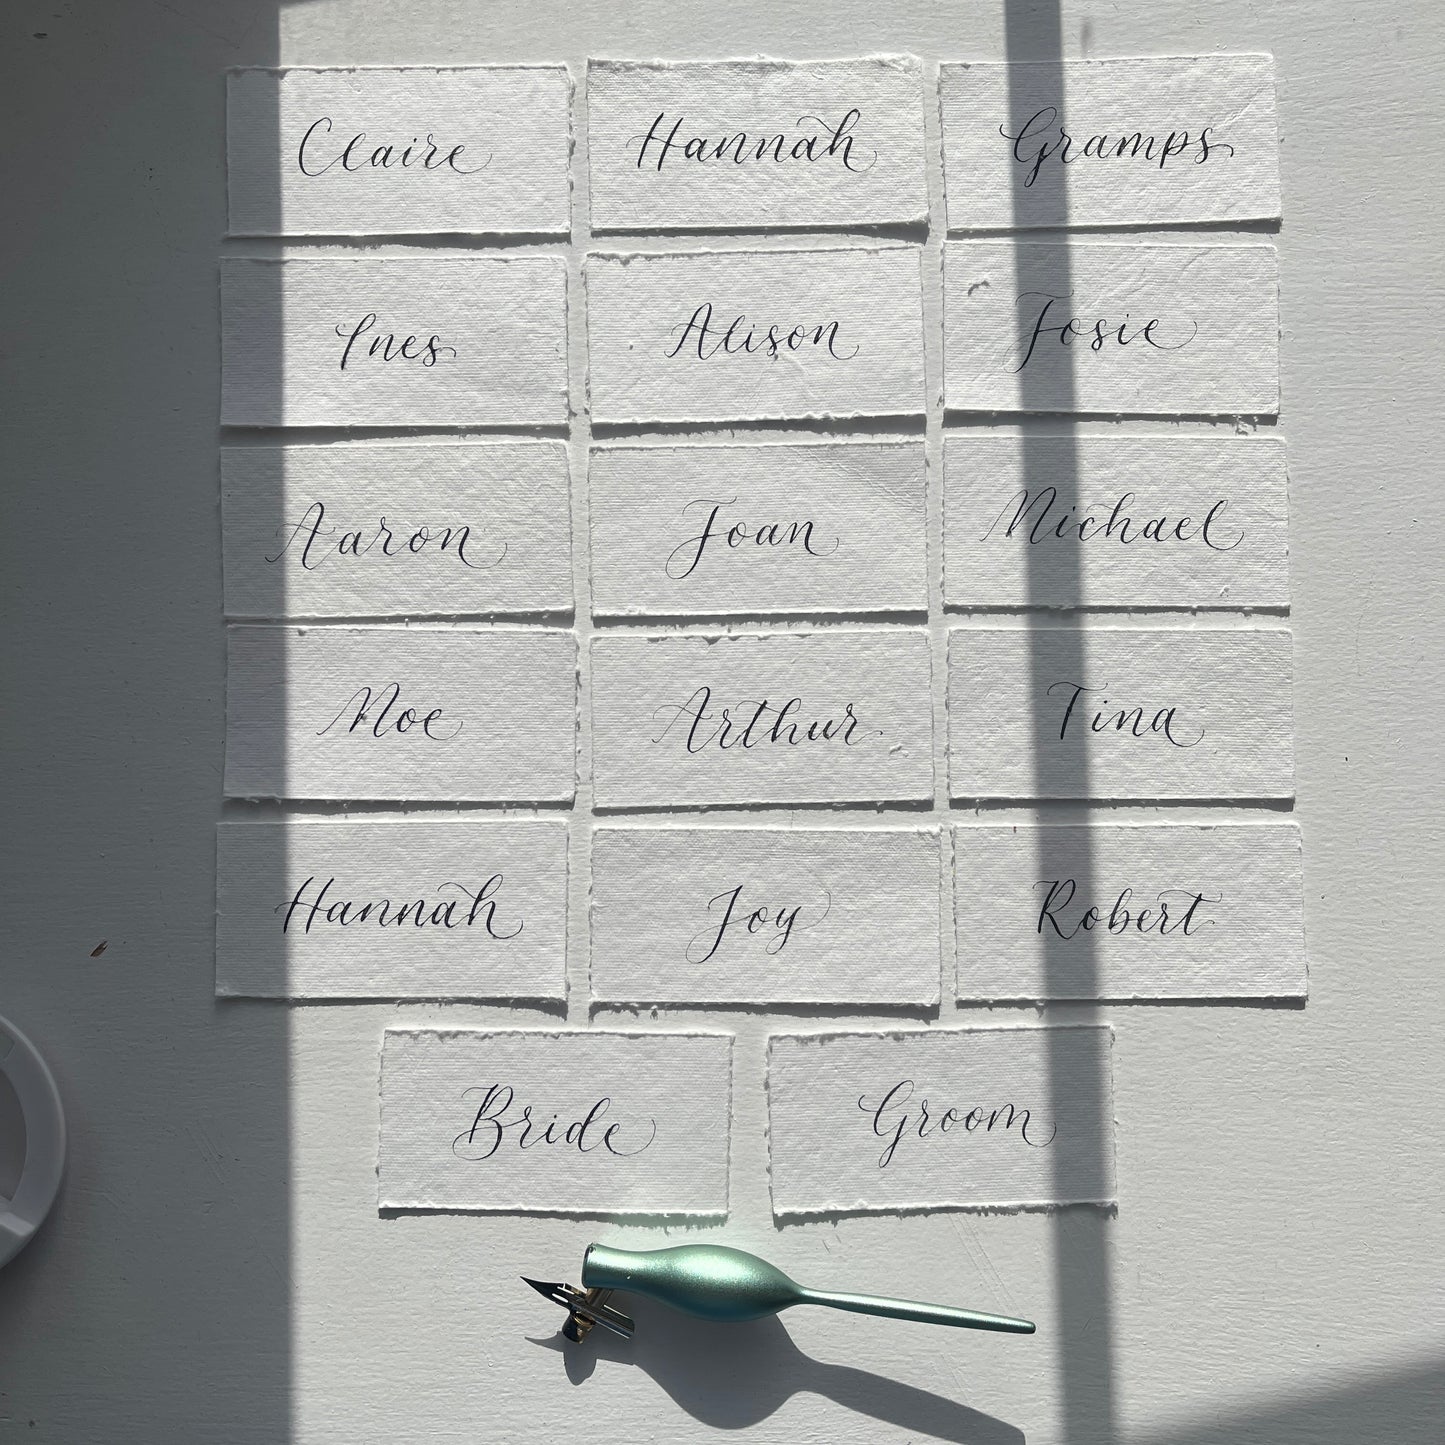 Handmade rag cotton paper with handwritten flourished calligraphy by Jodie Rose Calligraphy in Hampshire for weddings and events 